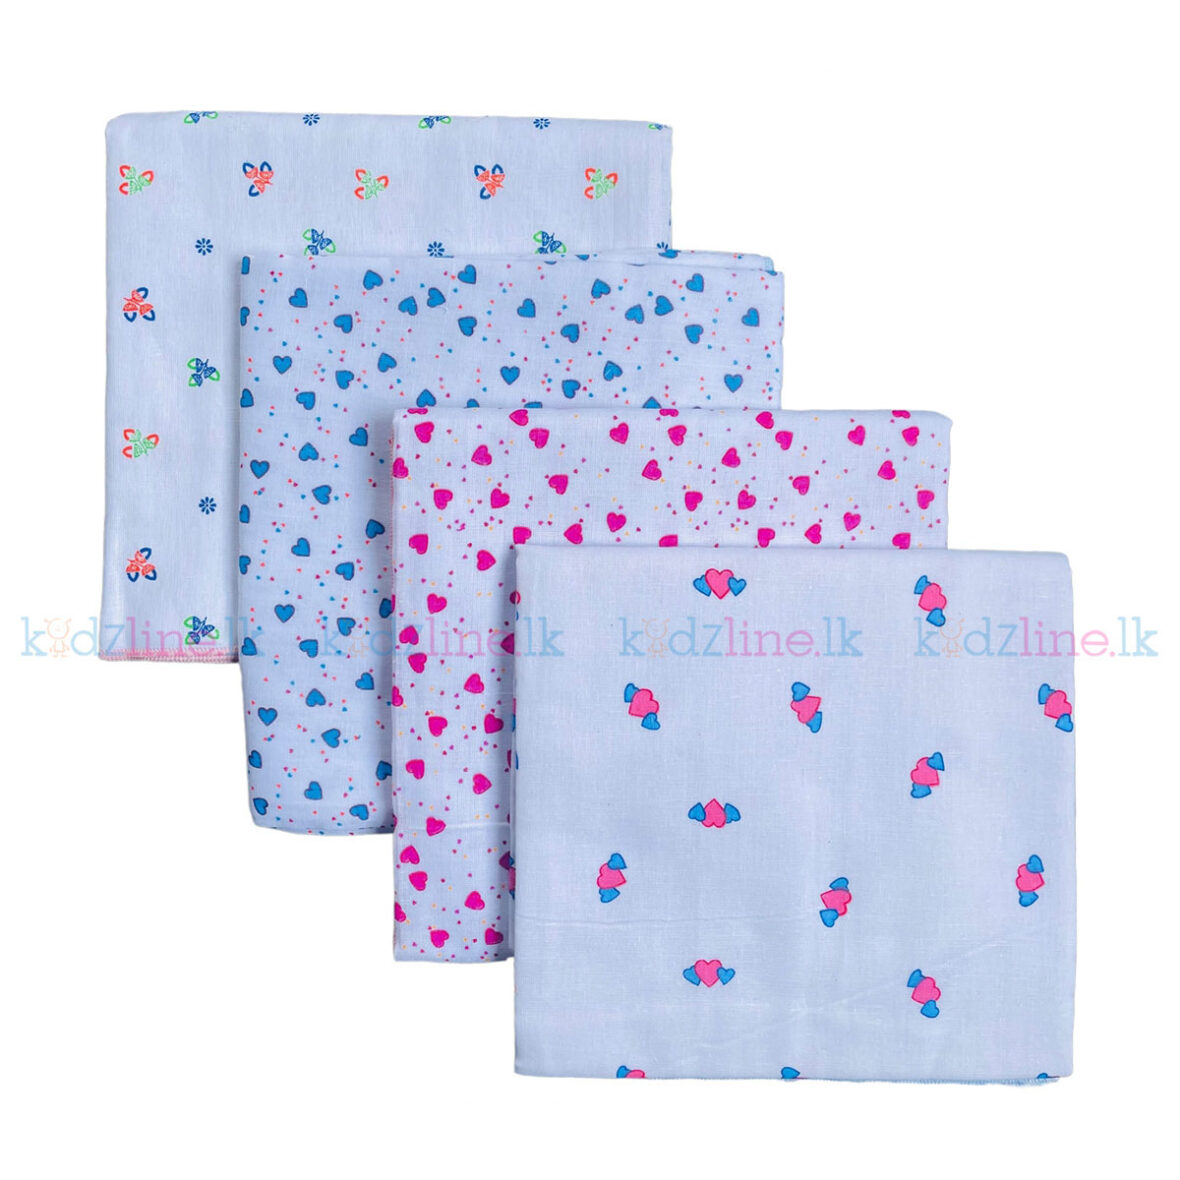 36×36 mull fabric Wrapping Cloth  ( Single )